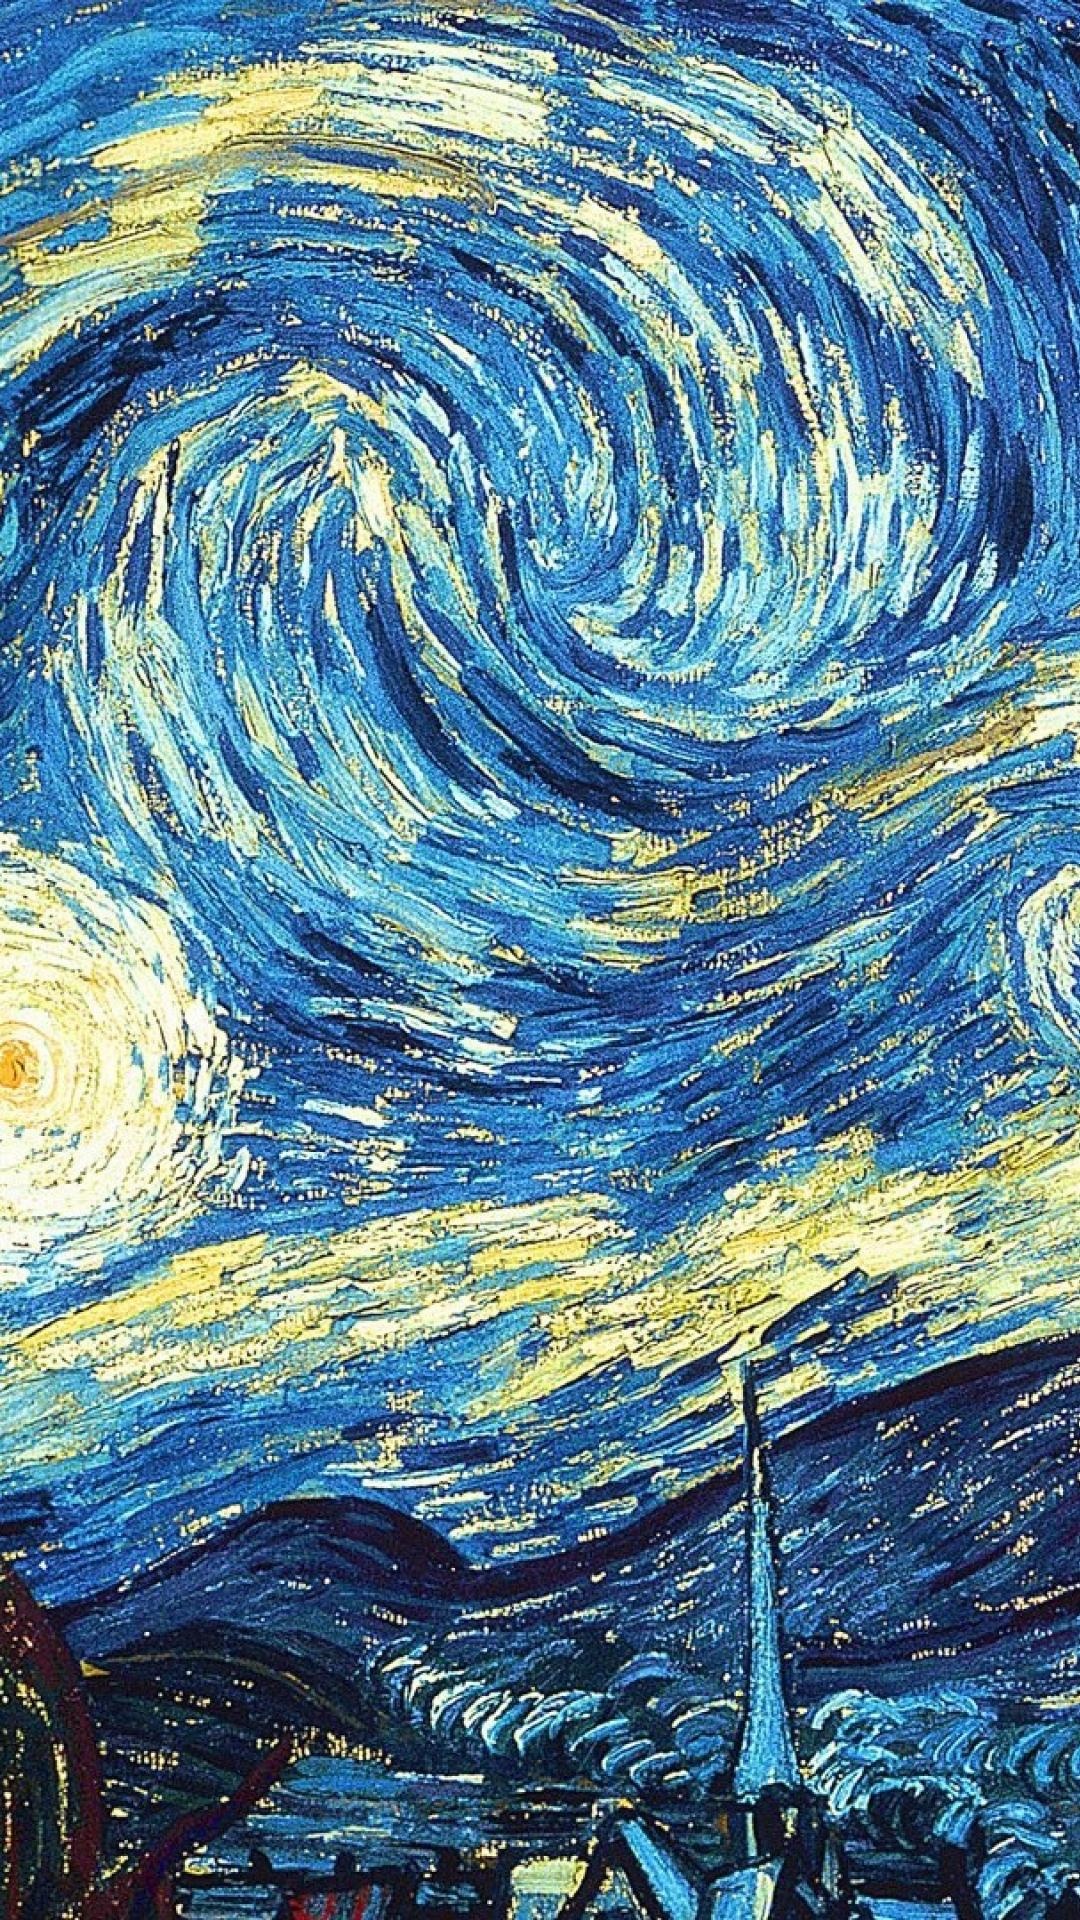 HD wallpaper, The Starry Night, Swirling Patterns, Vincent Van Gogh, Iphone 1080P The Starry Night Vincent Van Gogh Background, 1080X1920 Full Hd Phone, Night Sky